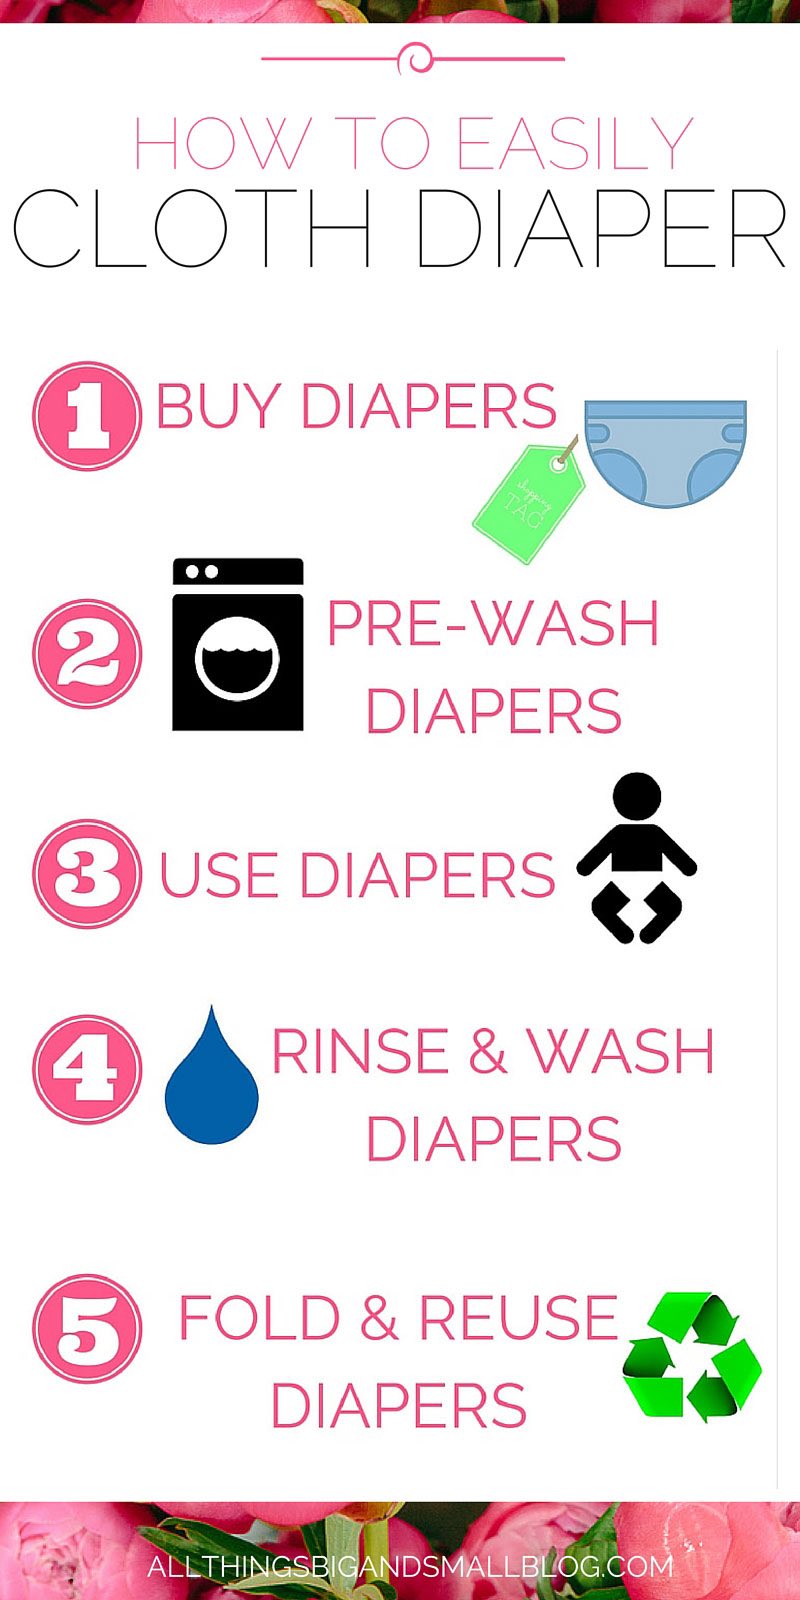 How to Cloth Diaper- Learn to cloth diaper in 5 easy steps! Cloth diapering is not hard and is a great way to save money with babies plus be green! Check out more motherhood tips and tricks from All Things Big and Small Blog!